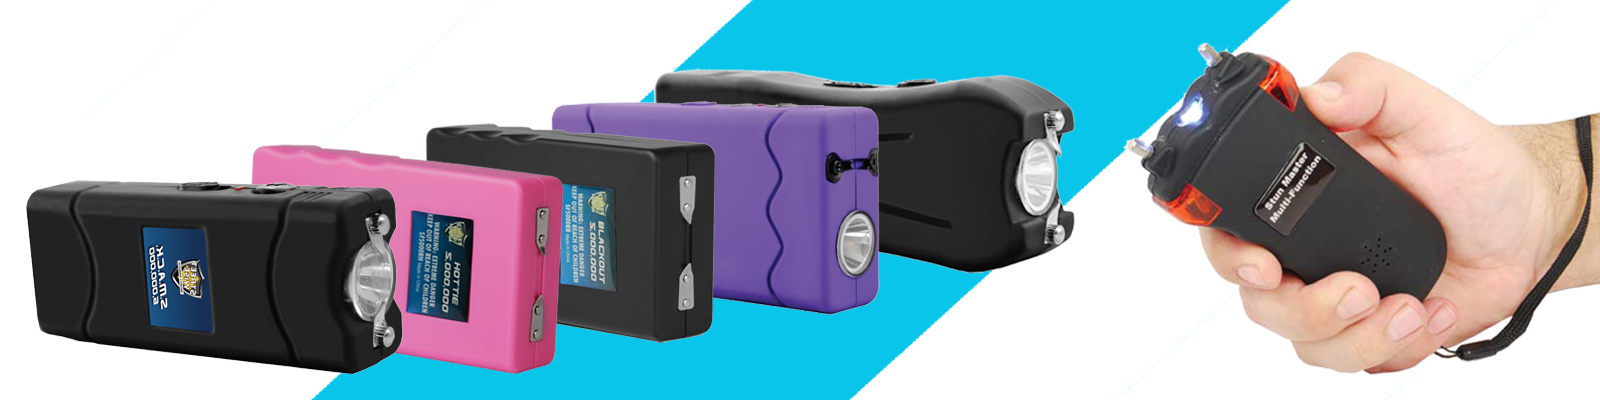 Rechargeable stun guns come with an included recharging cord or built-in plug.